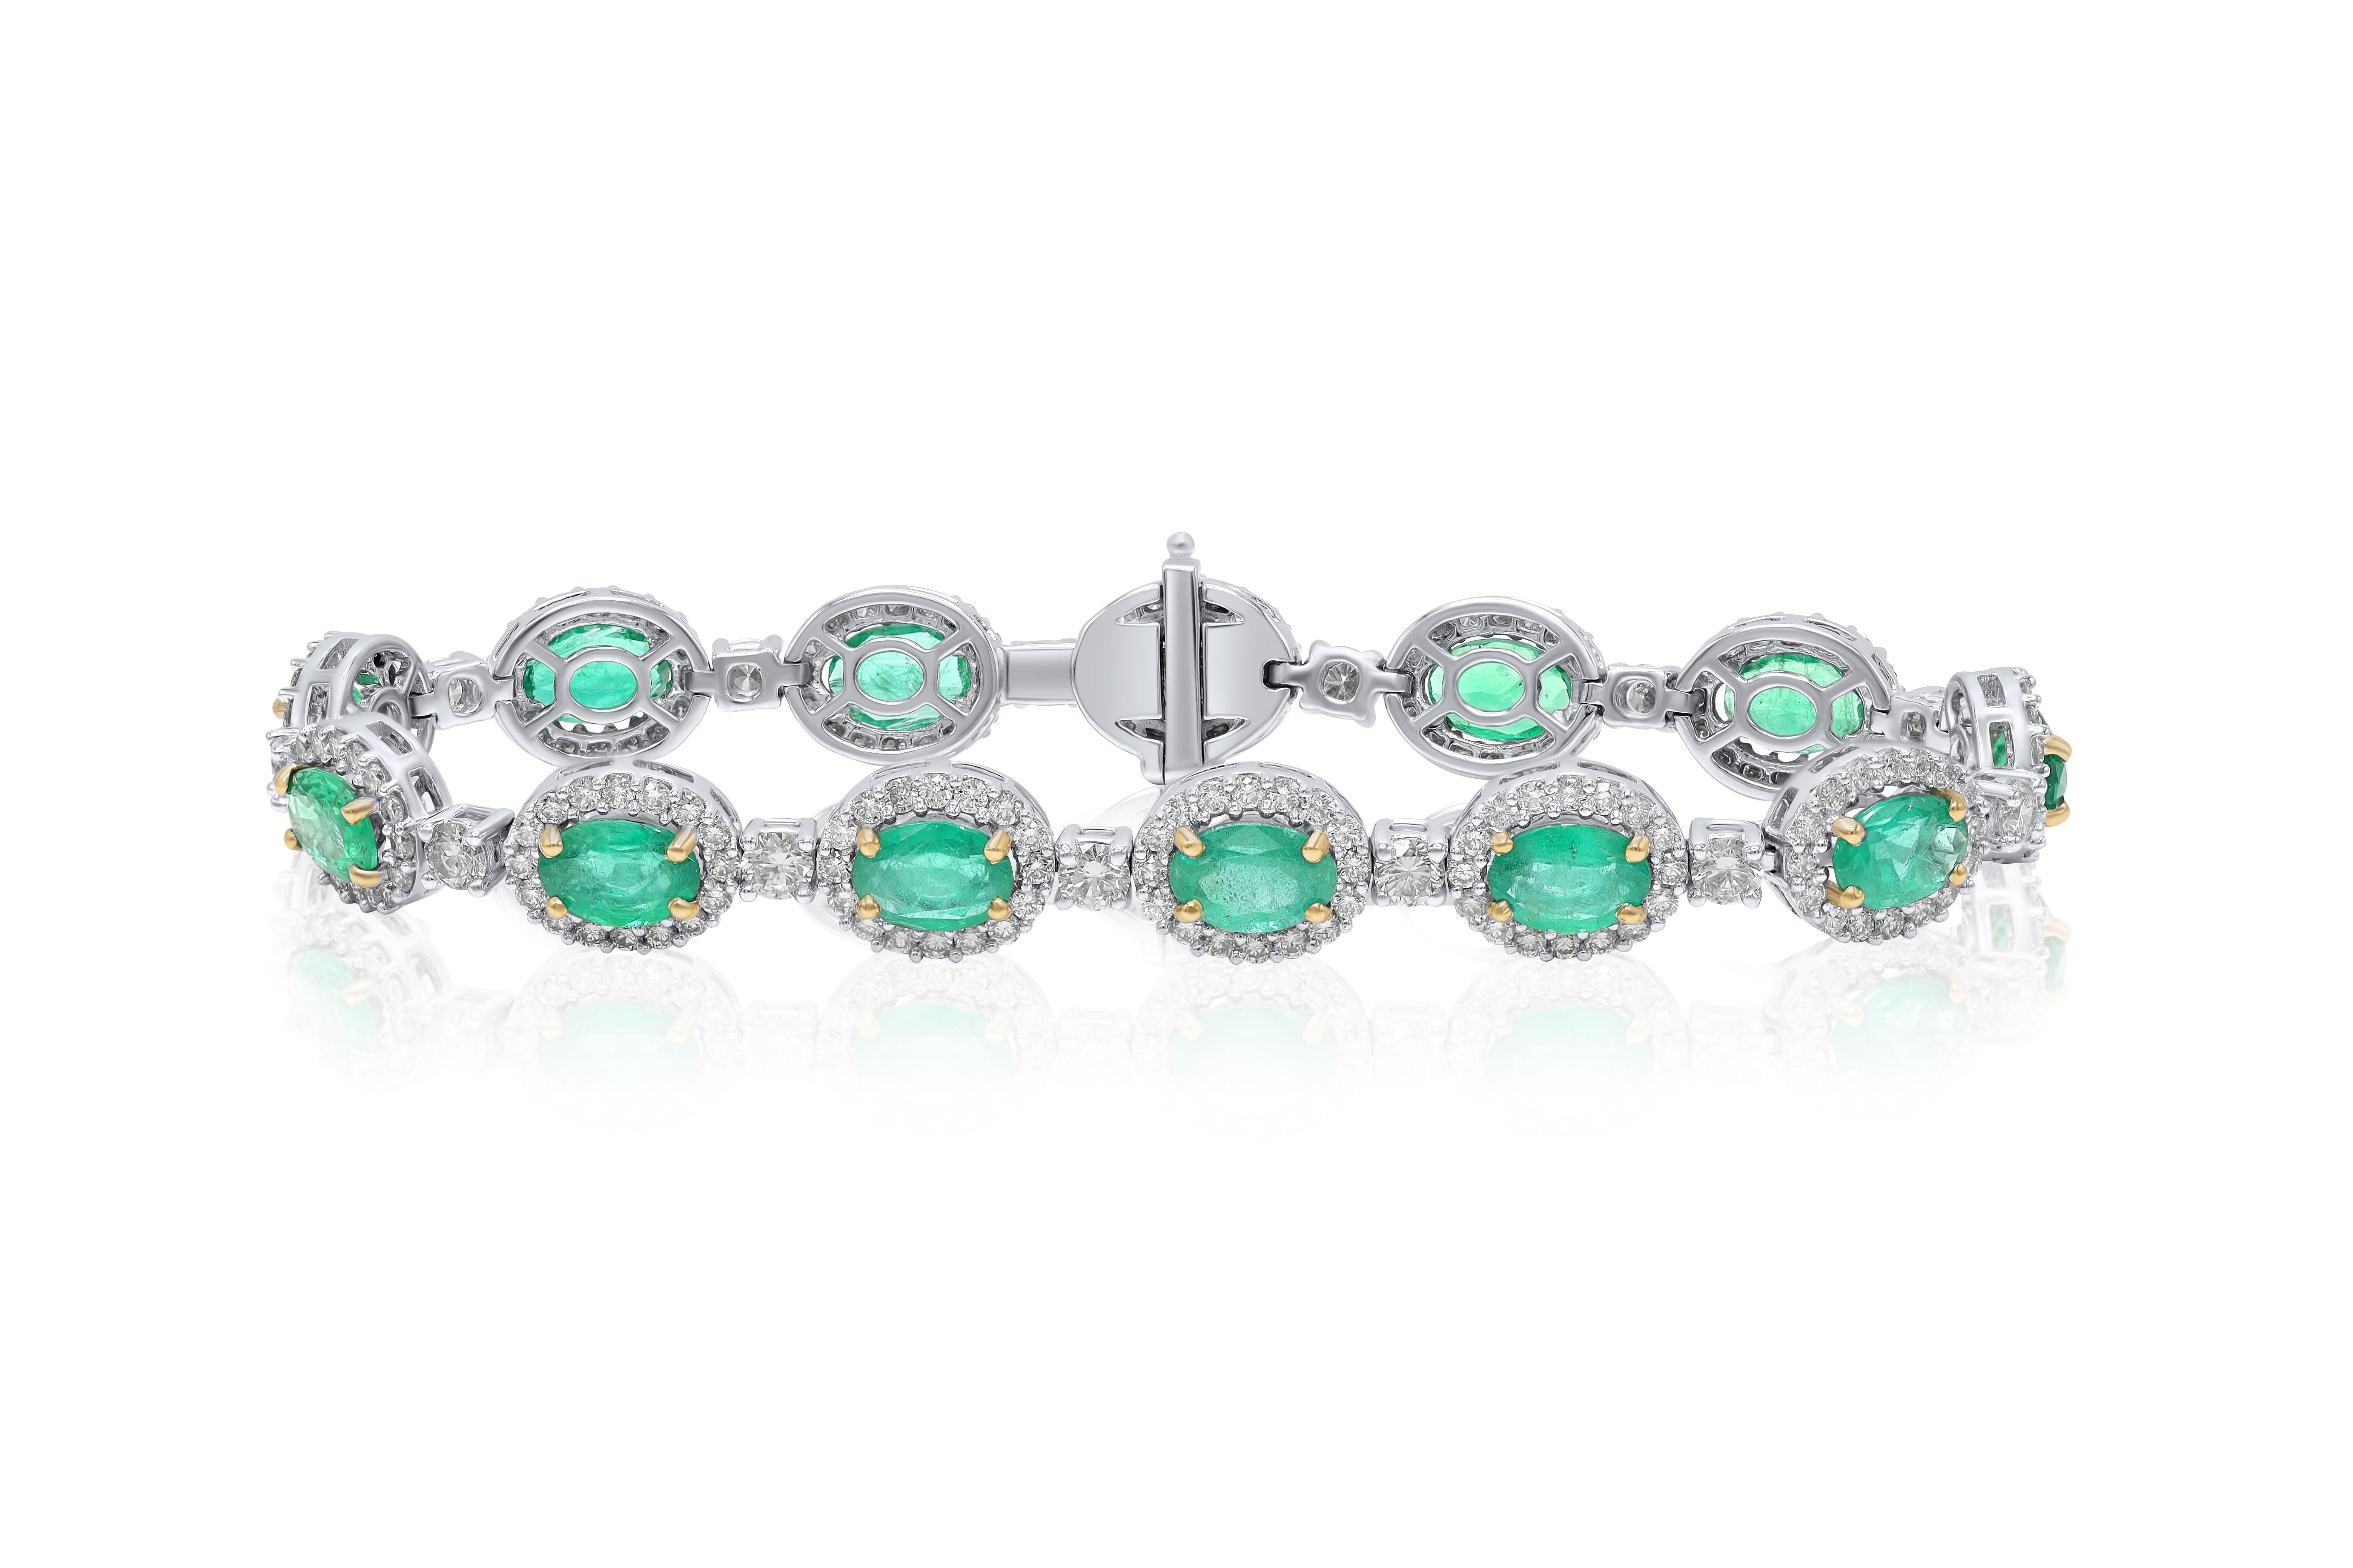 Diana M. 8.01 Carat Emerald and Diamond Bracelet in White Gold In New Condition For Sale In New York, NY